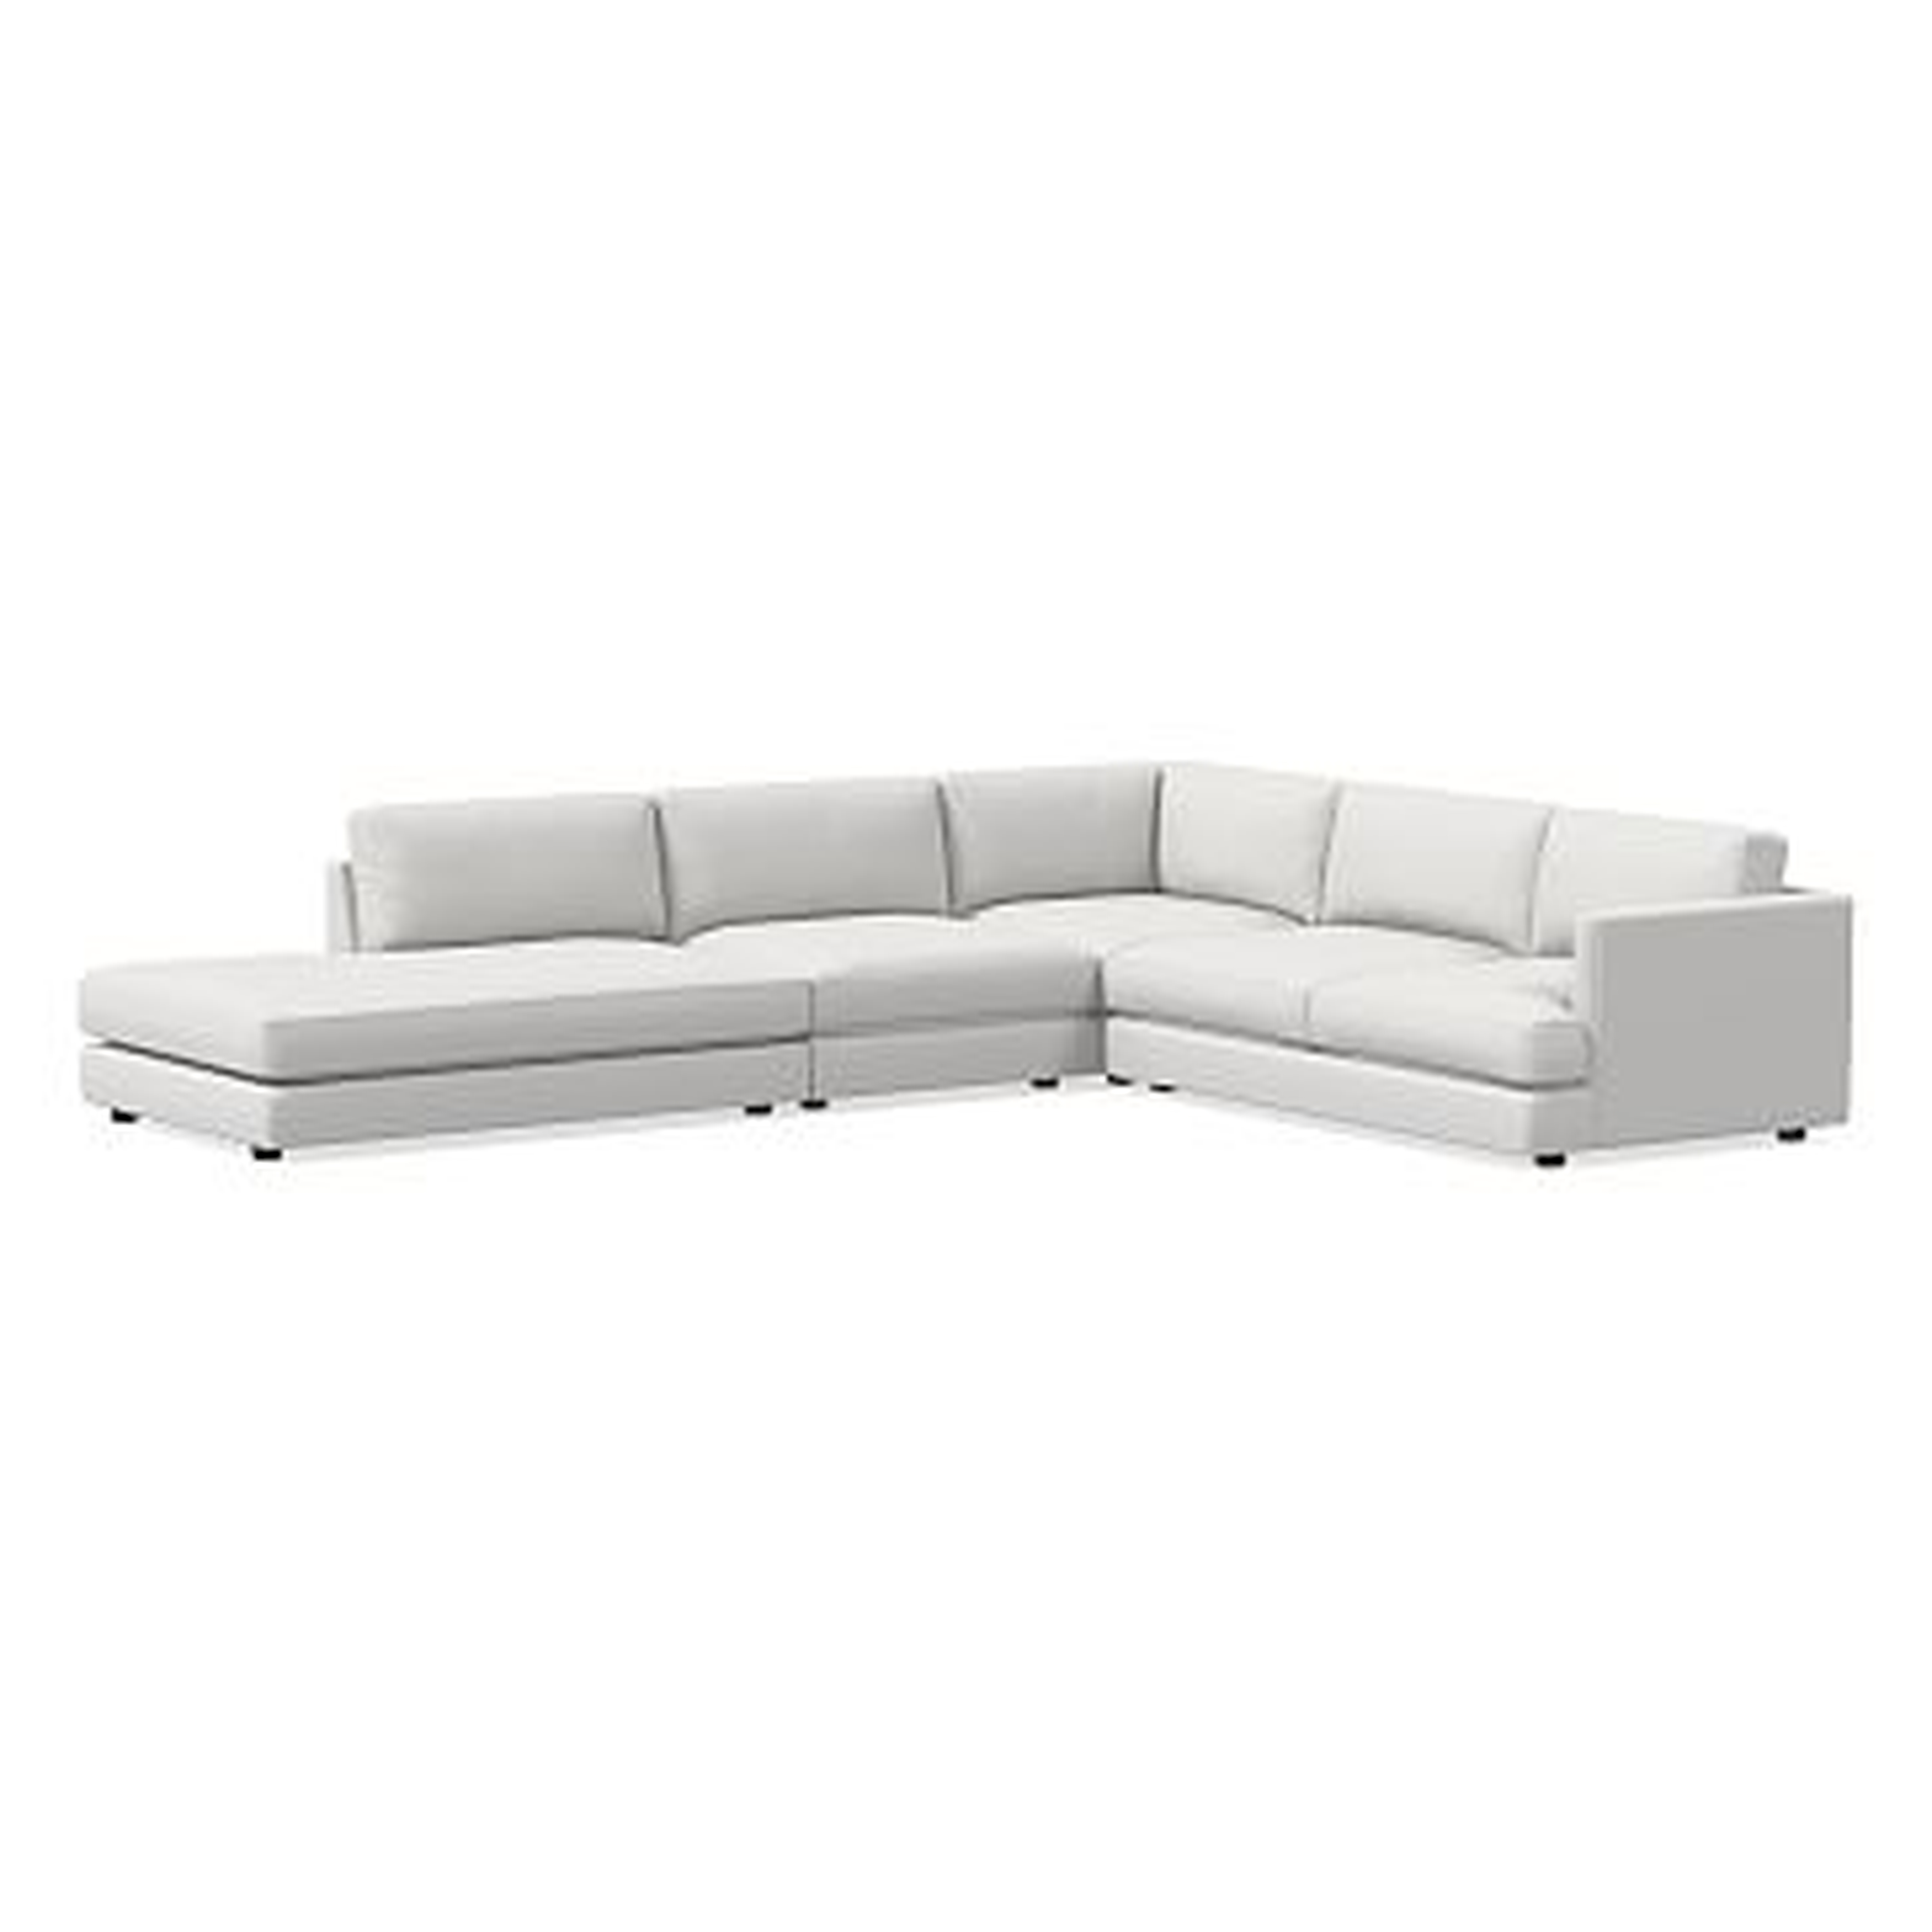 Haven Sectional Set 23: Right Arm 2.5 Seater Sofa, Corner, Single, Left Arm Bumper Chaise, Trillium, Performance Washed Canvas, White, Concealed Supports - West Elm